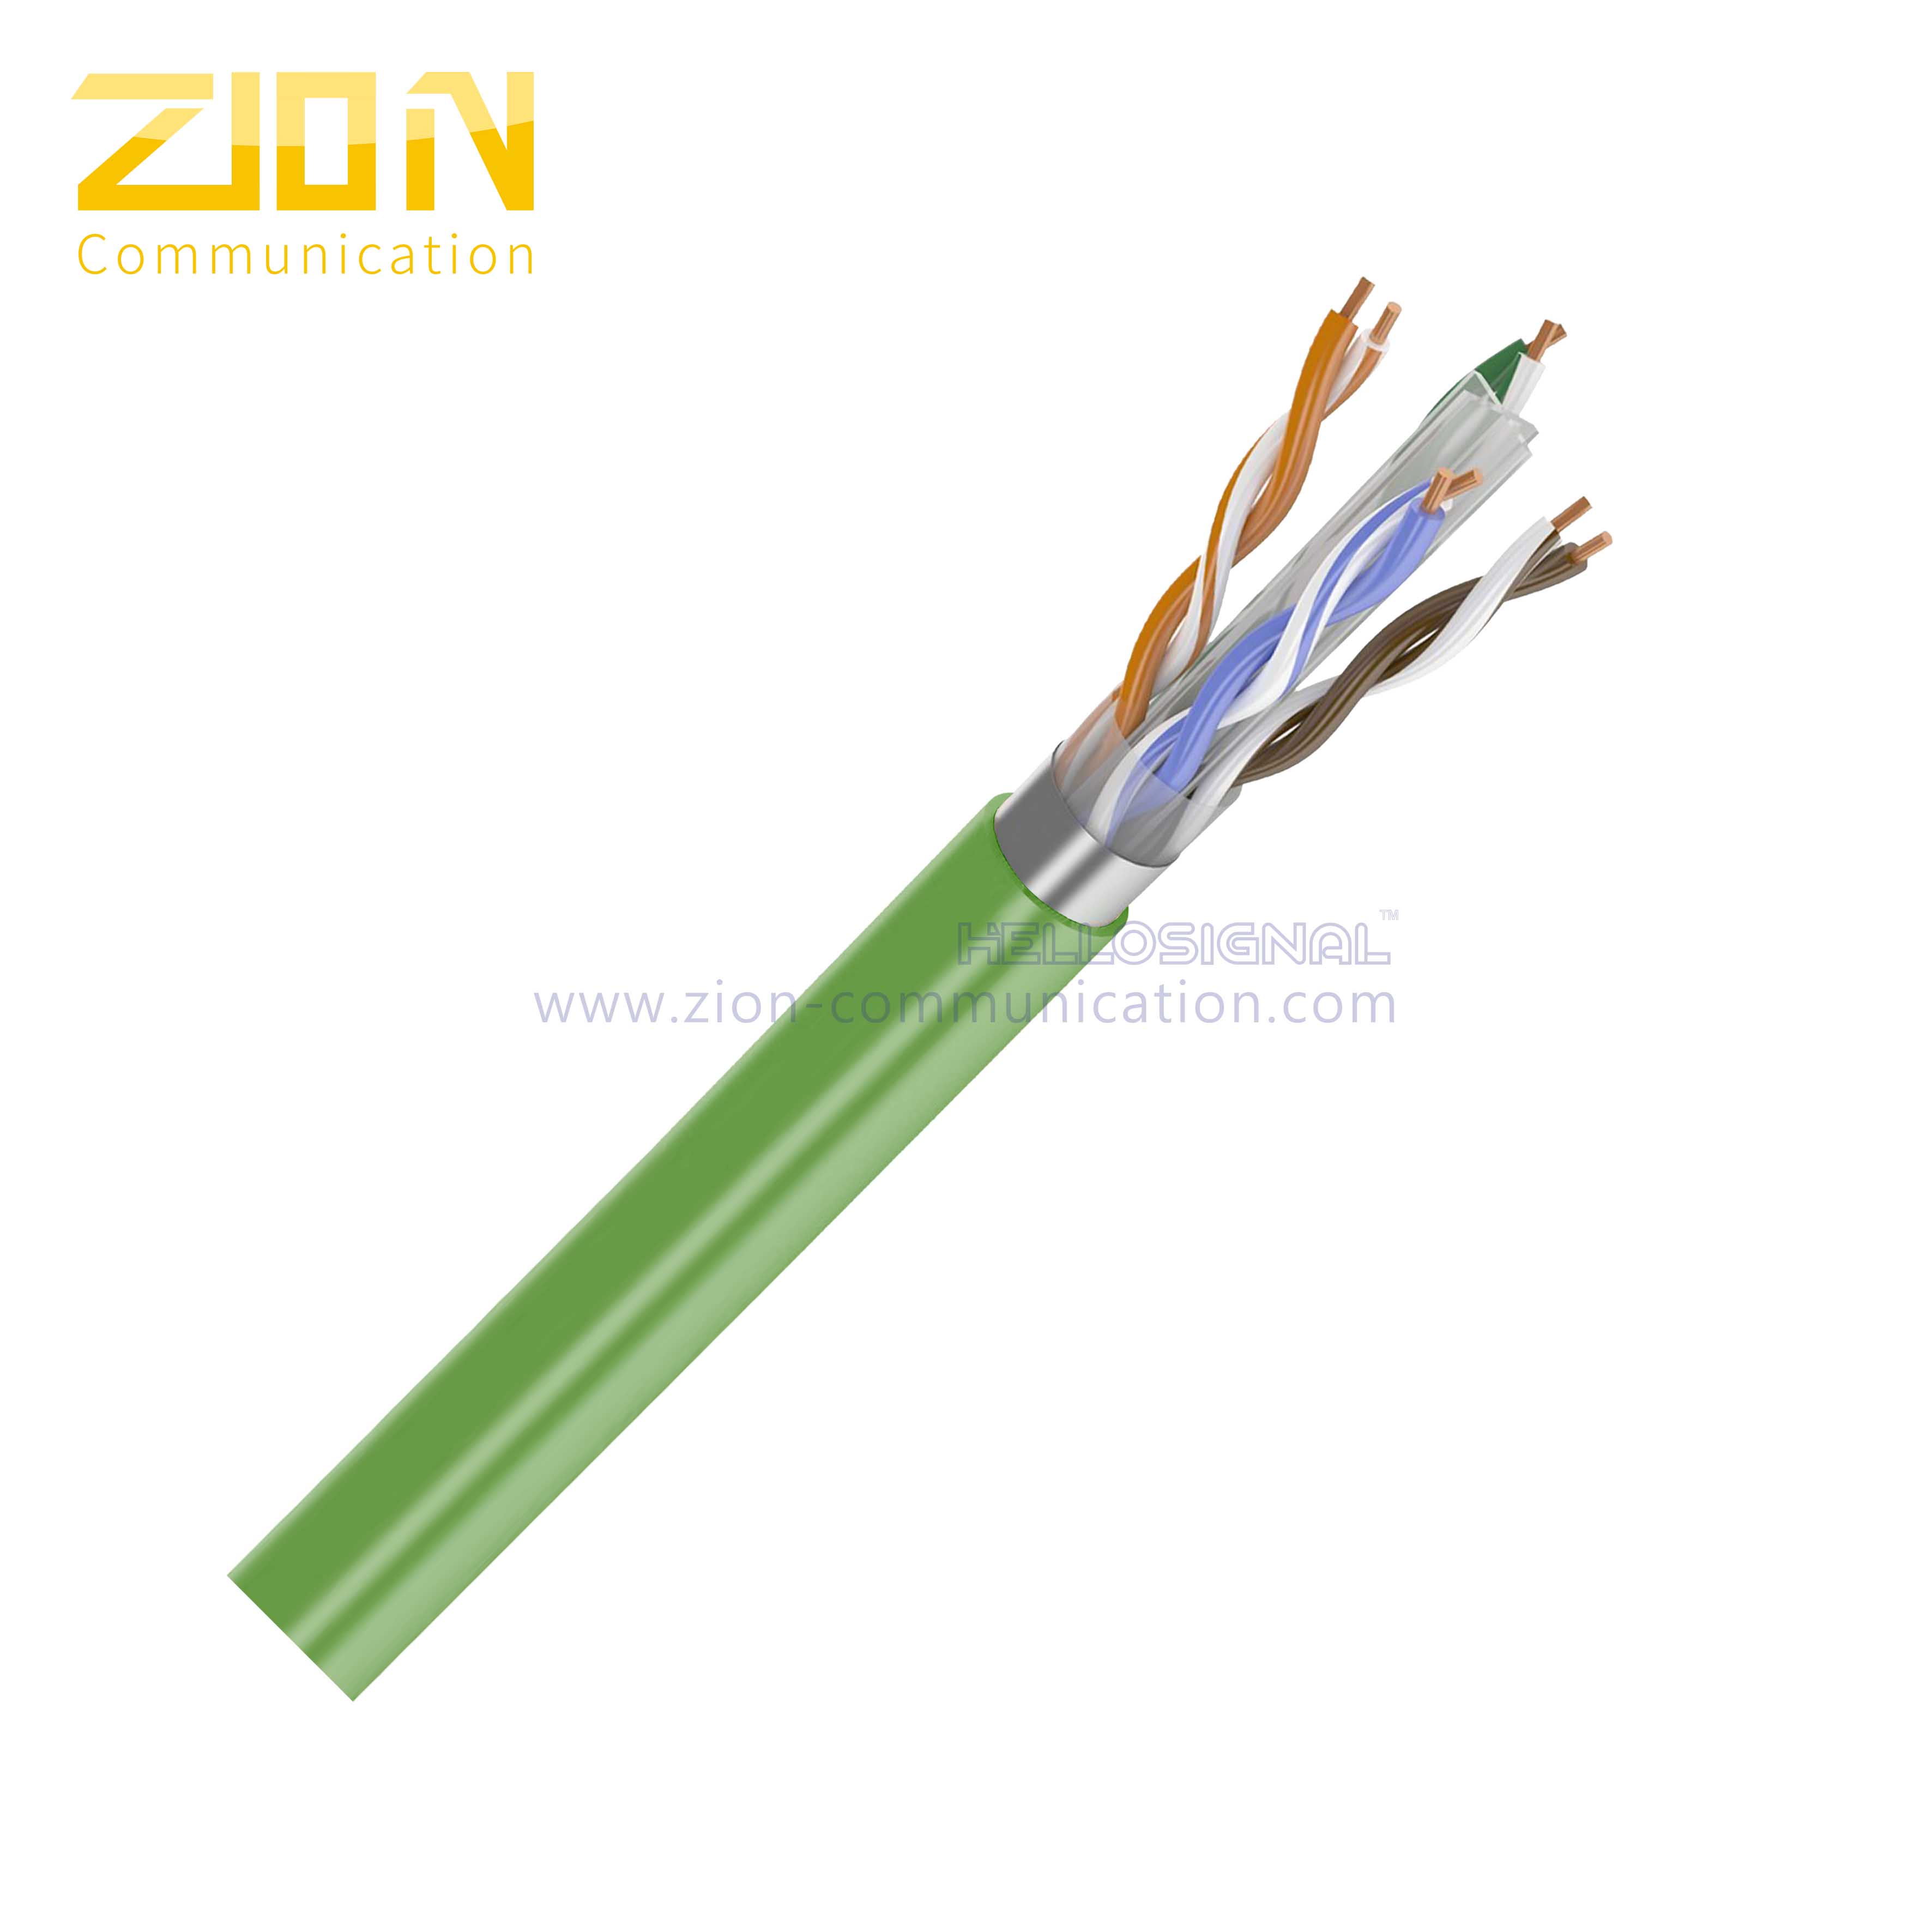 F Utp Cat6 4pr 23awg Lszh Ethernet Network Cable From China Manufacturer Zion Communication